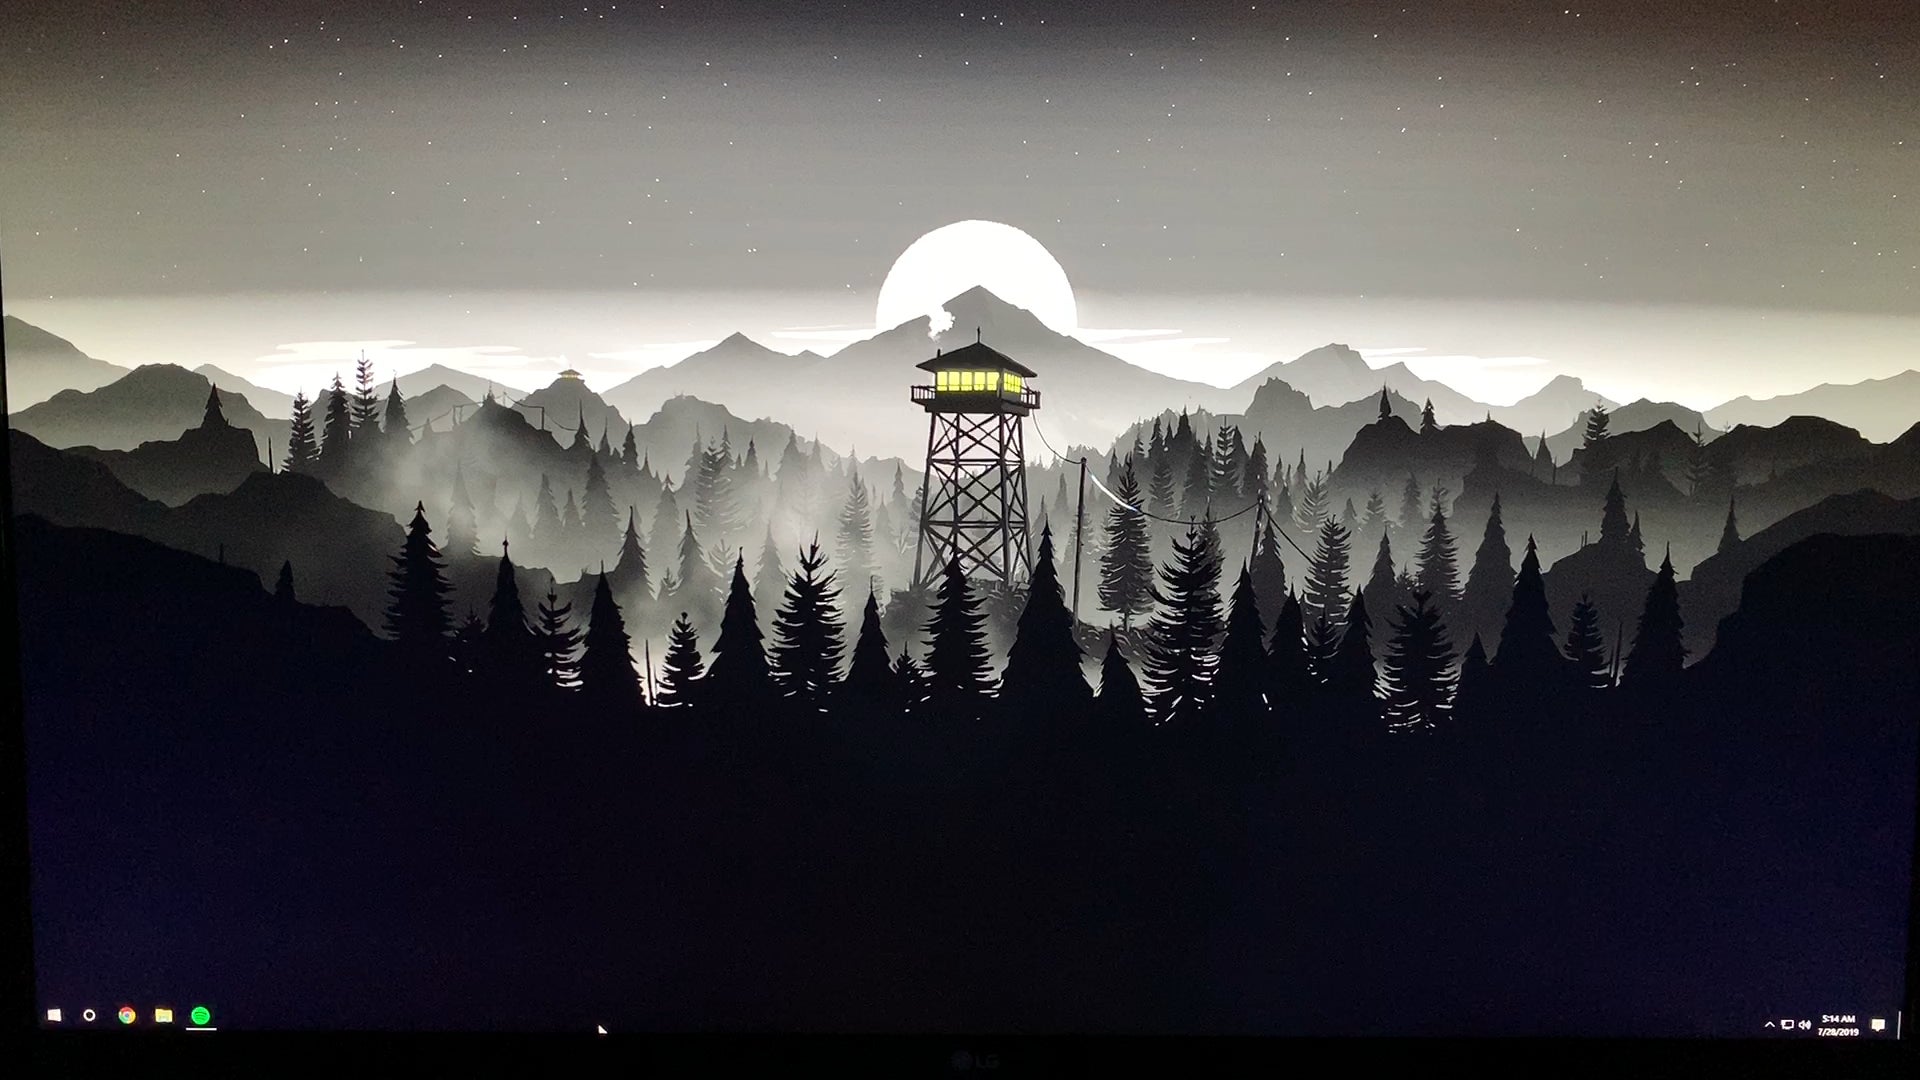 Just Pulled An All Nighter For This. This Is One Of My First Wallpaper I've Made So Don't Judge Me If Its Bad. Hope You Enjoy! Wallpaper: “Firewatch Tower AMOLED Friendly White Edit